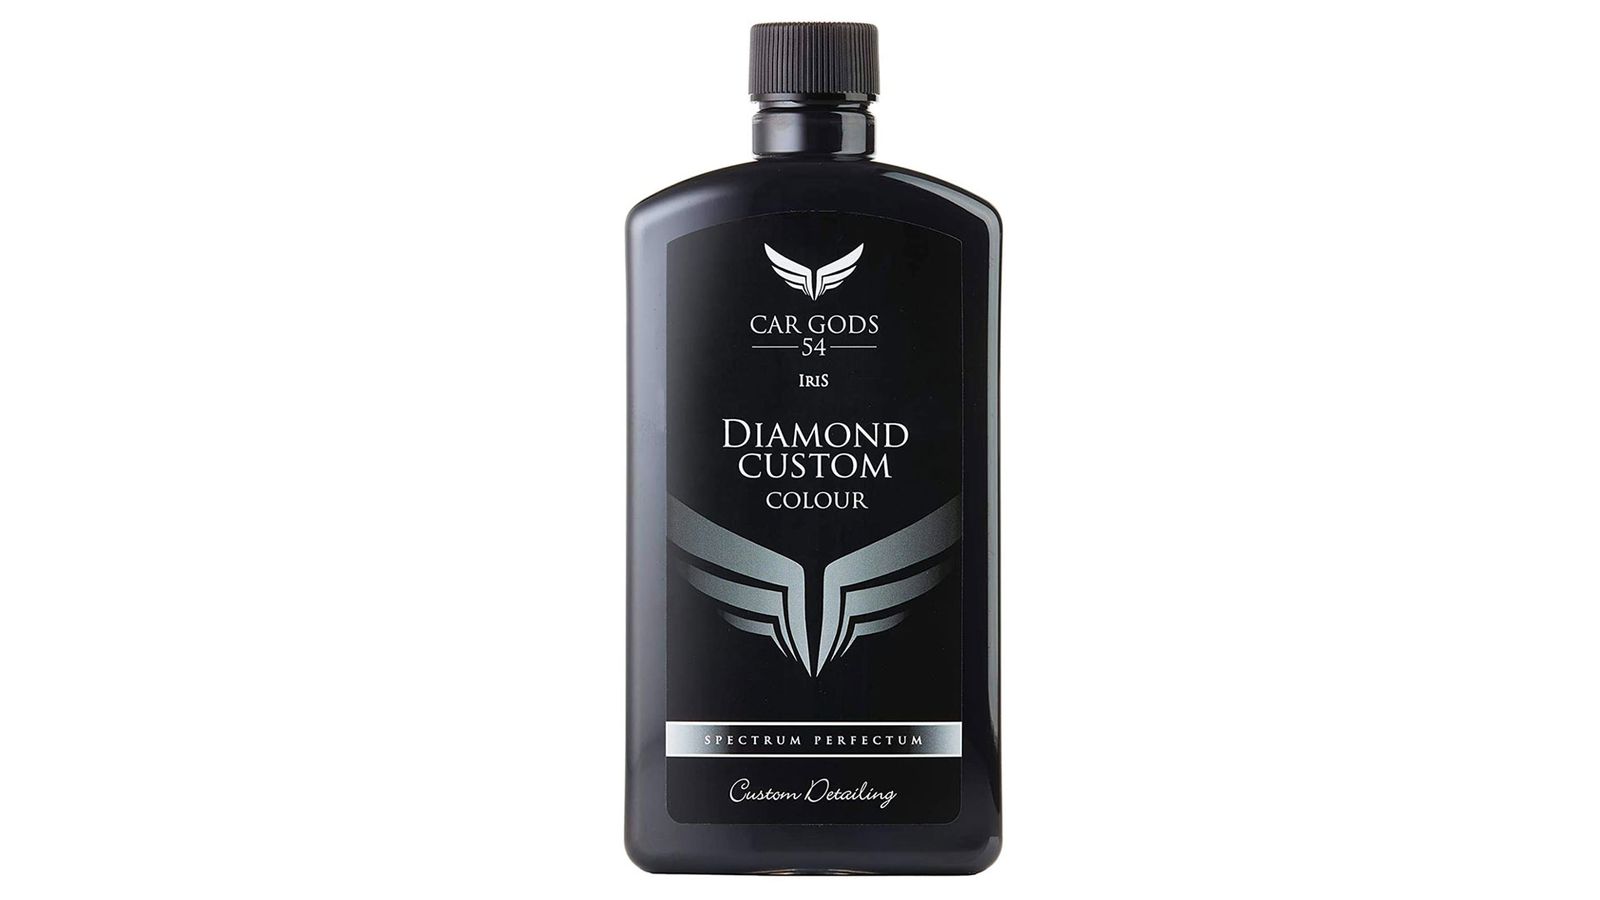 Car Gods Black Carnauba Wax Polish product image of a black bottle with a silver and white label.